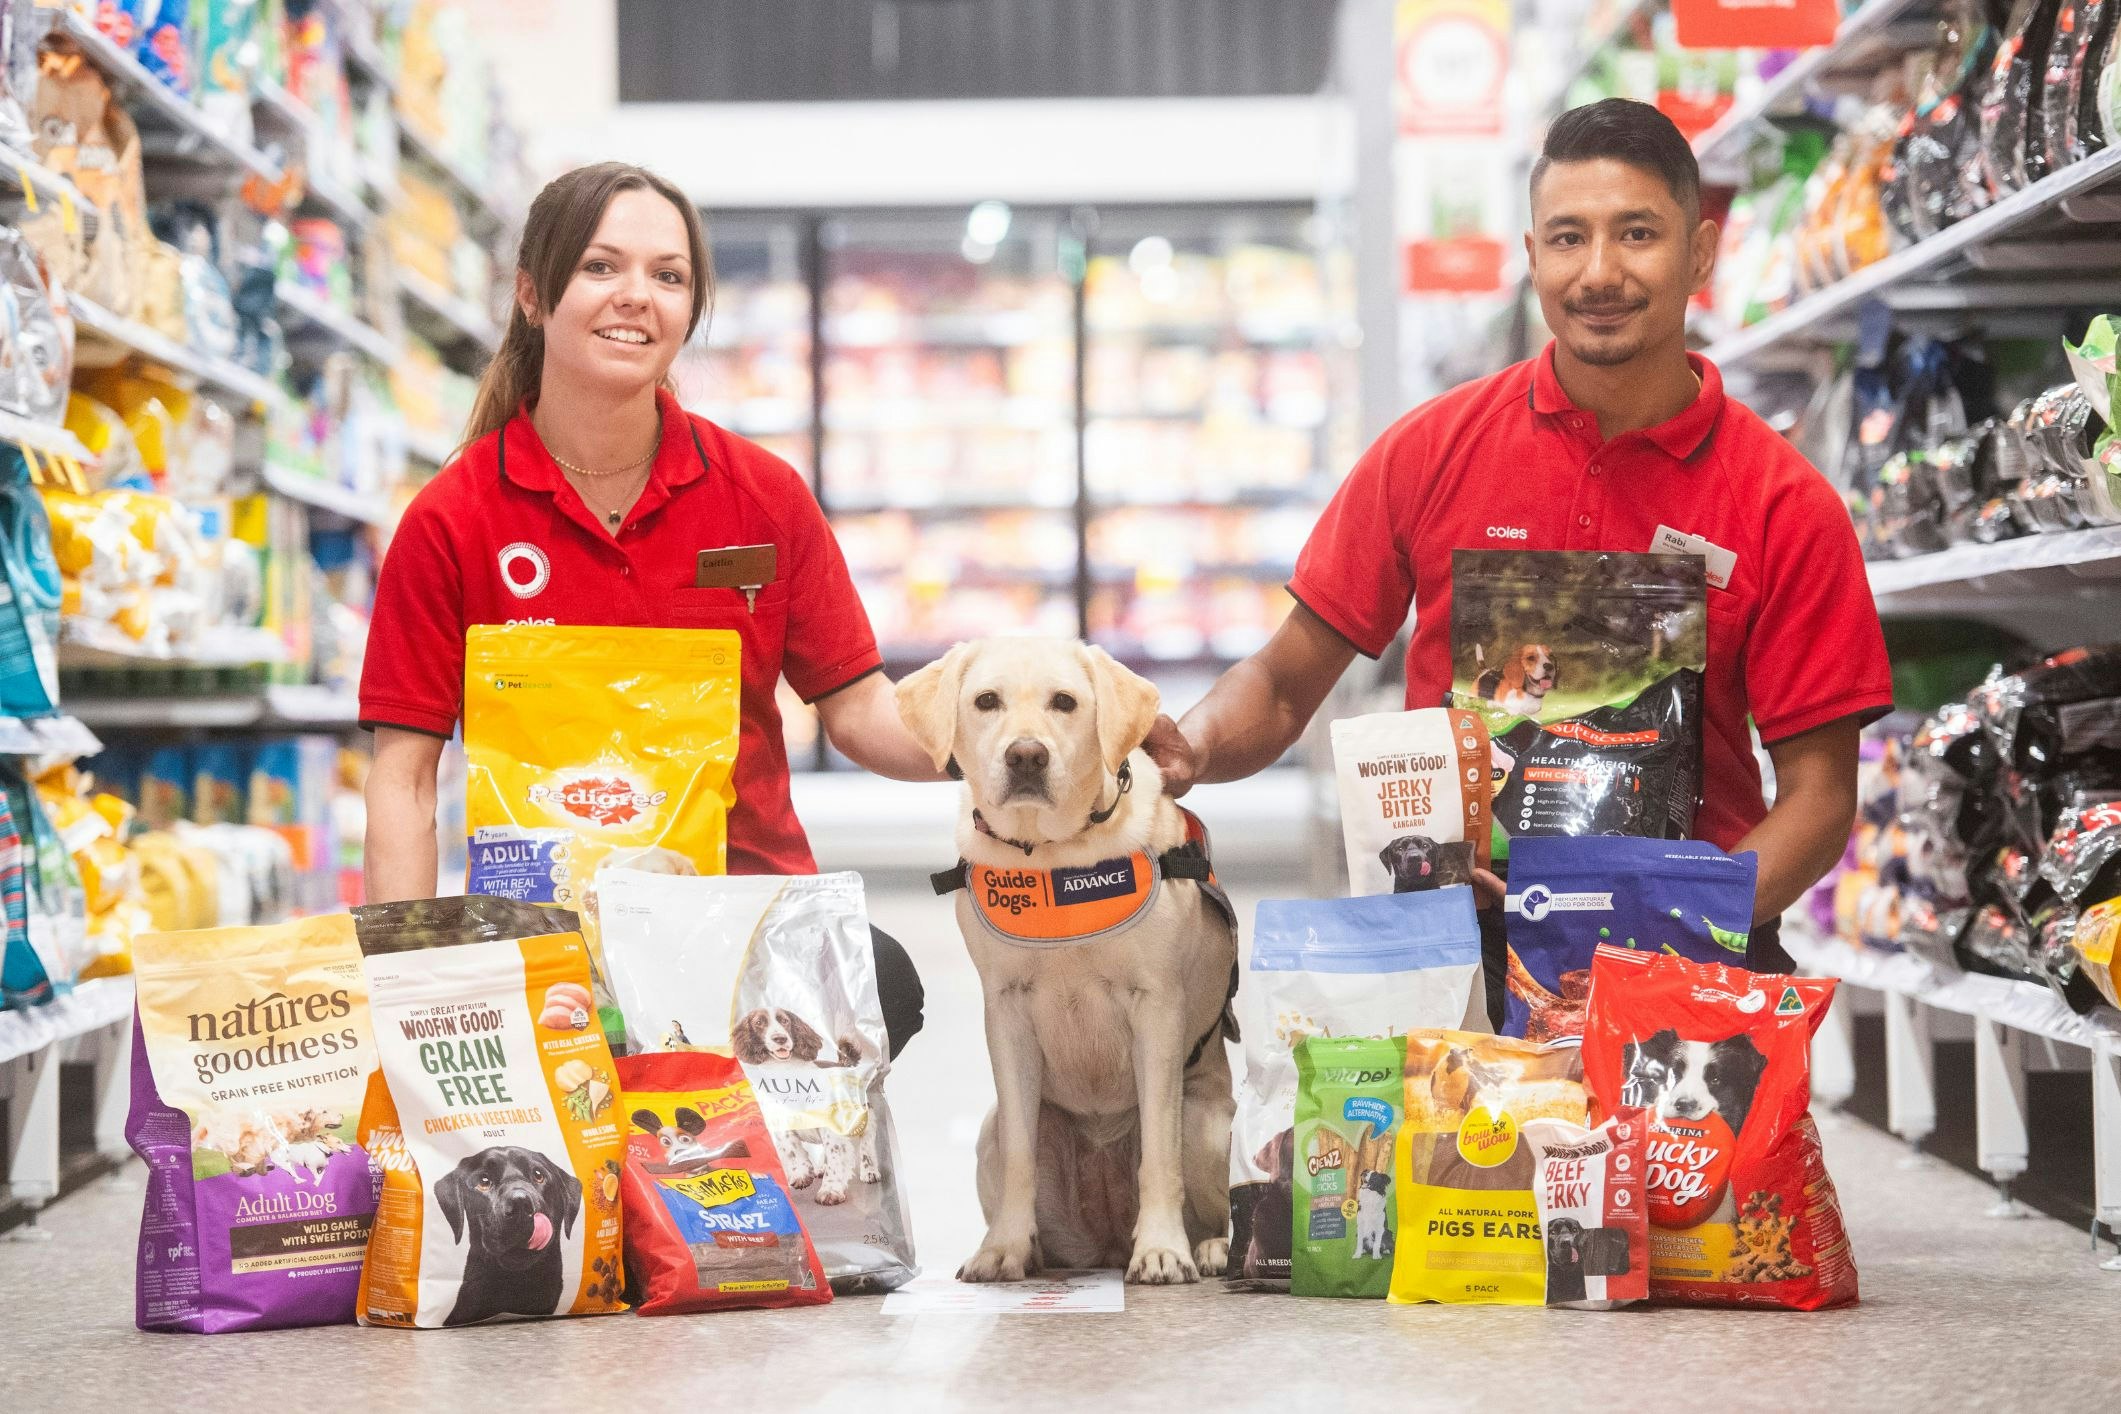 Coles team members Caitlin and Rabi with puppy-in-training Orion. [Source: Coles Group]
